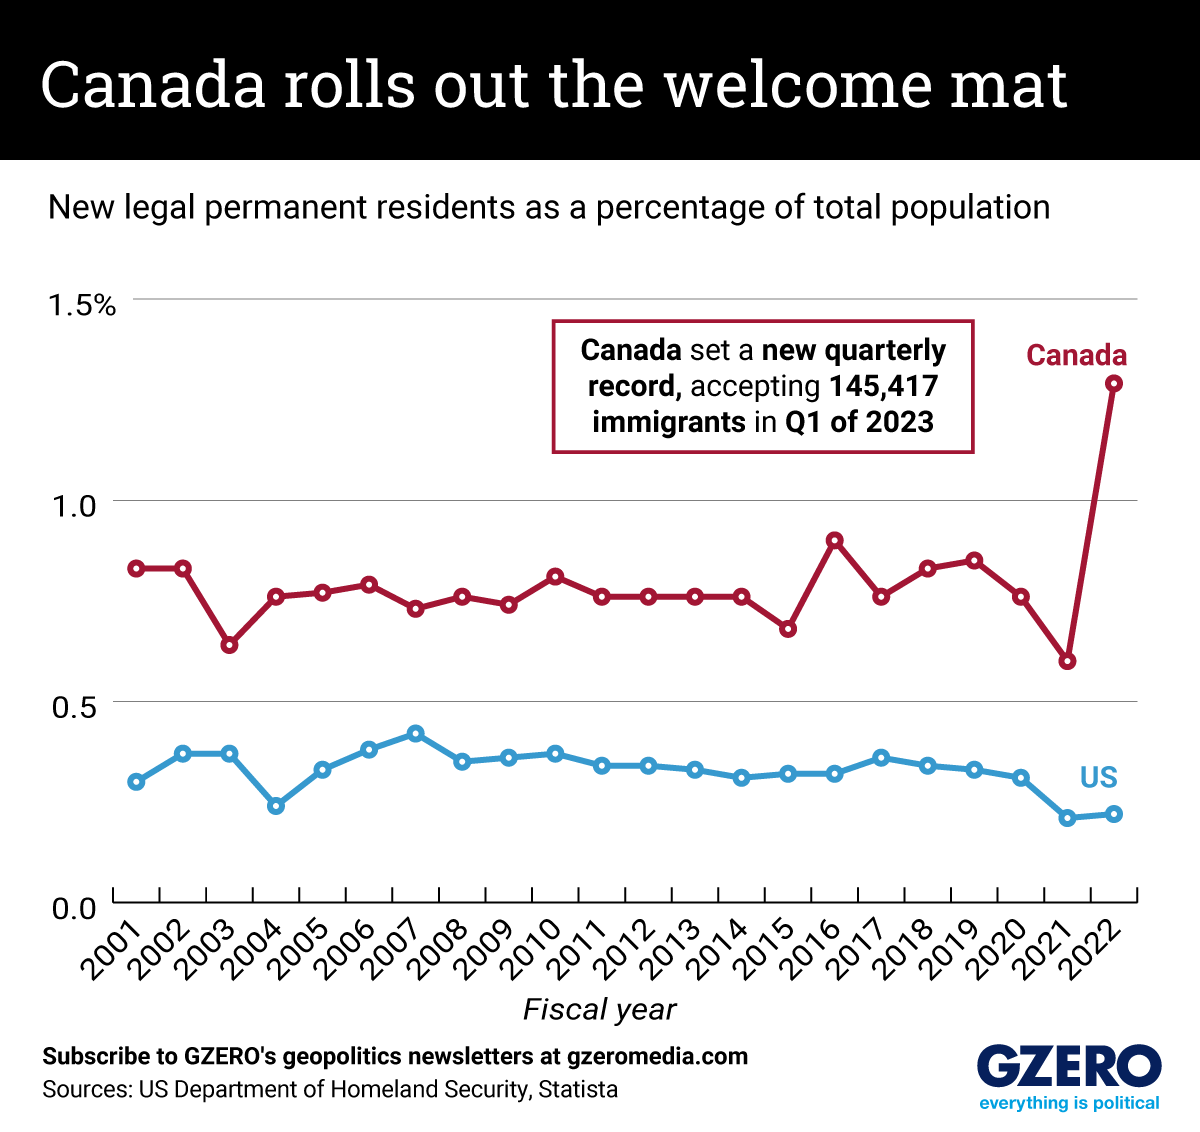 The Graphic Truth: Canada rolls out the welcome mat